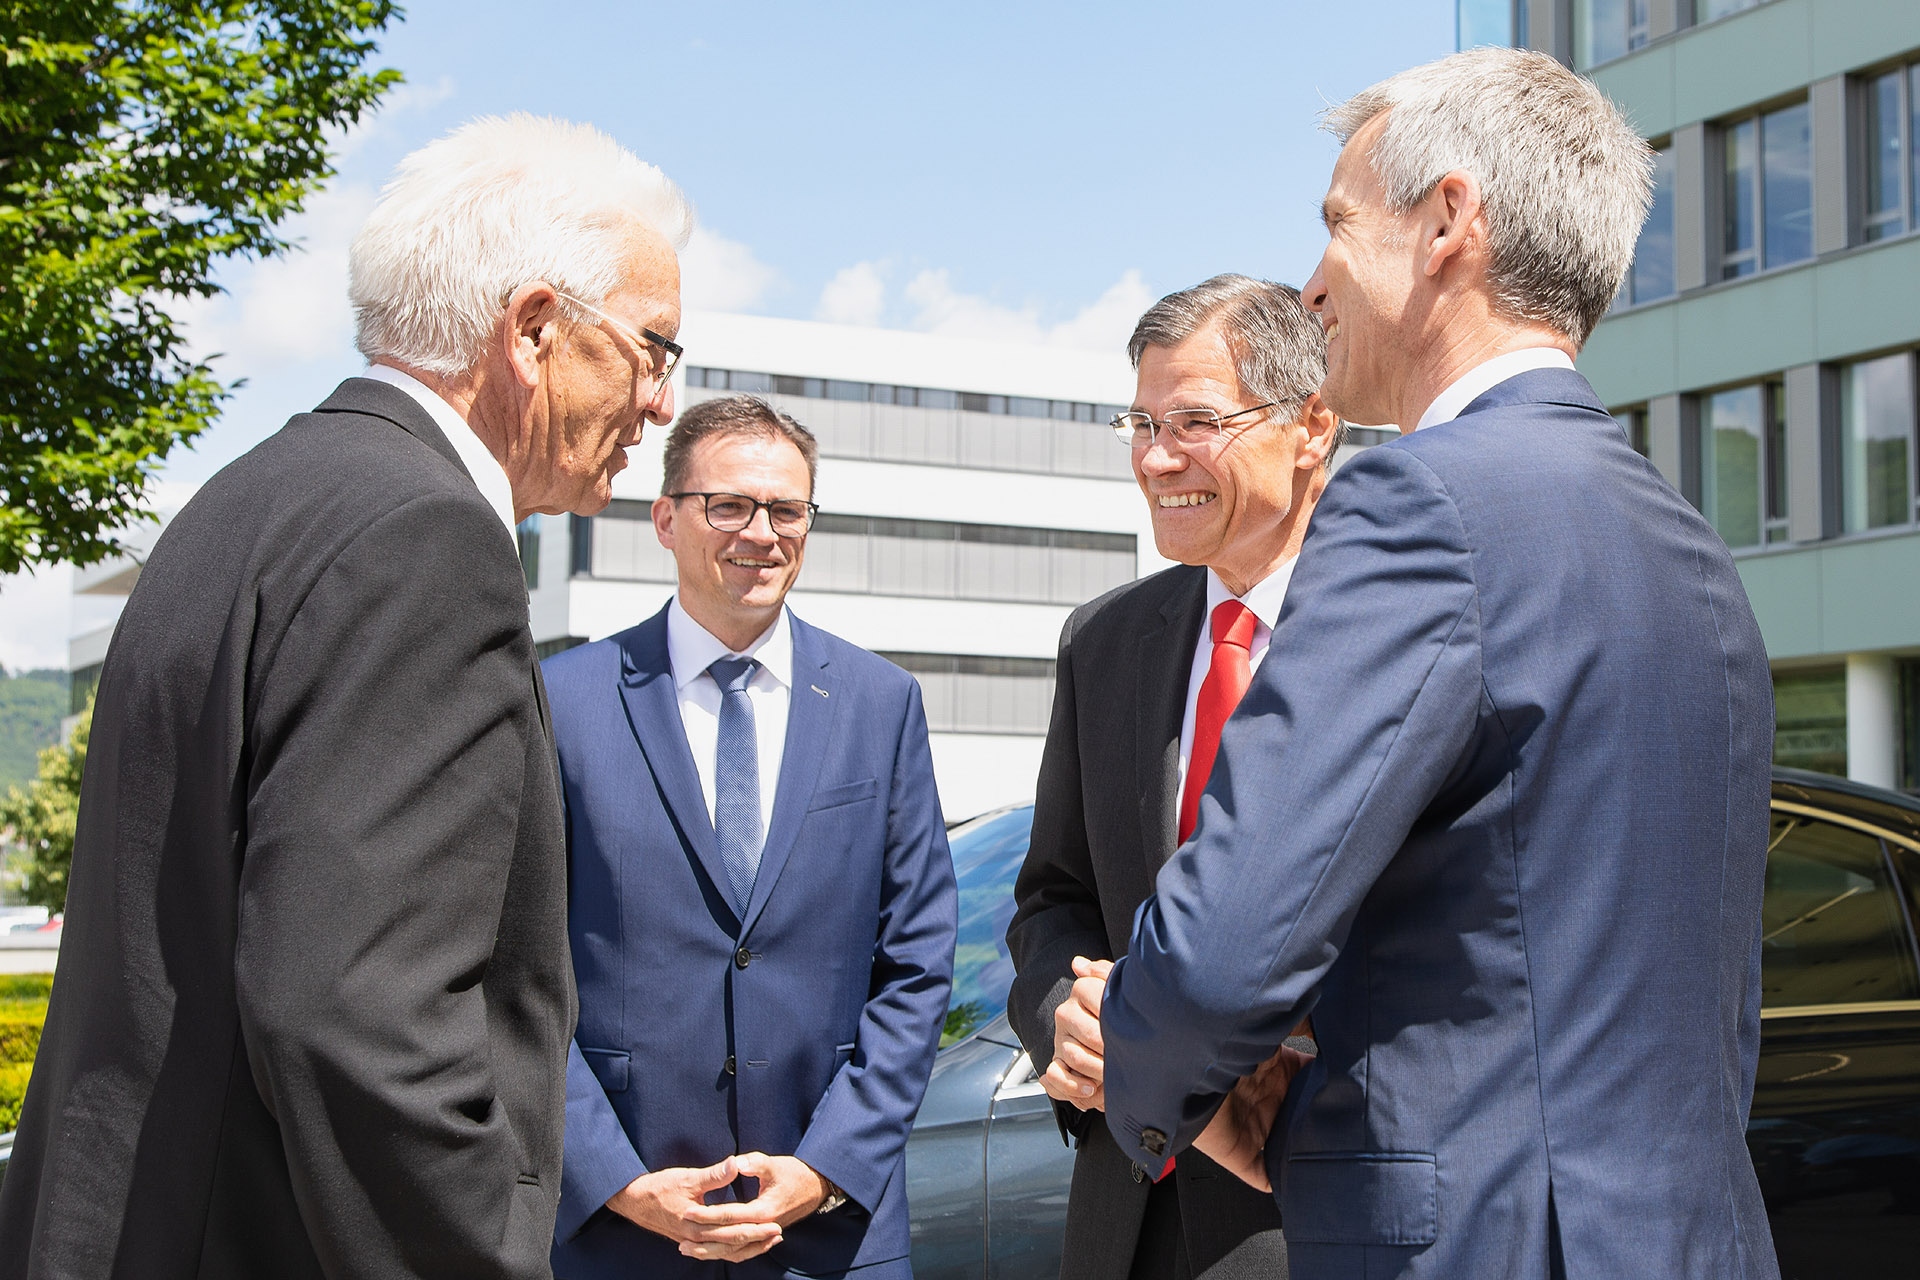 Today, the Governor of the state of Baden-Württemberg, Winfried Kretschmann, visited the Oberkochen headquarters of ZEISS, an internationally leading technology enterprise operating in the fields of optics and optoelectronics. Dr. Karl Lamprecht, President and CEO of ZEISS and Andreas Pecher, Member of the ZEISS Executive Board with responsibility for the Semiconductor Manufacturing Technology (SMT) segment, gave the Minister President a glimpse into the production of the &quot;most precise&quot; mirrors in the world.